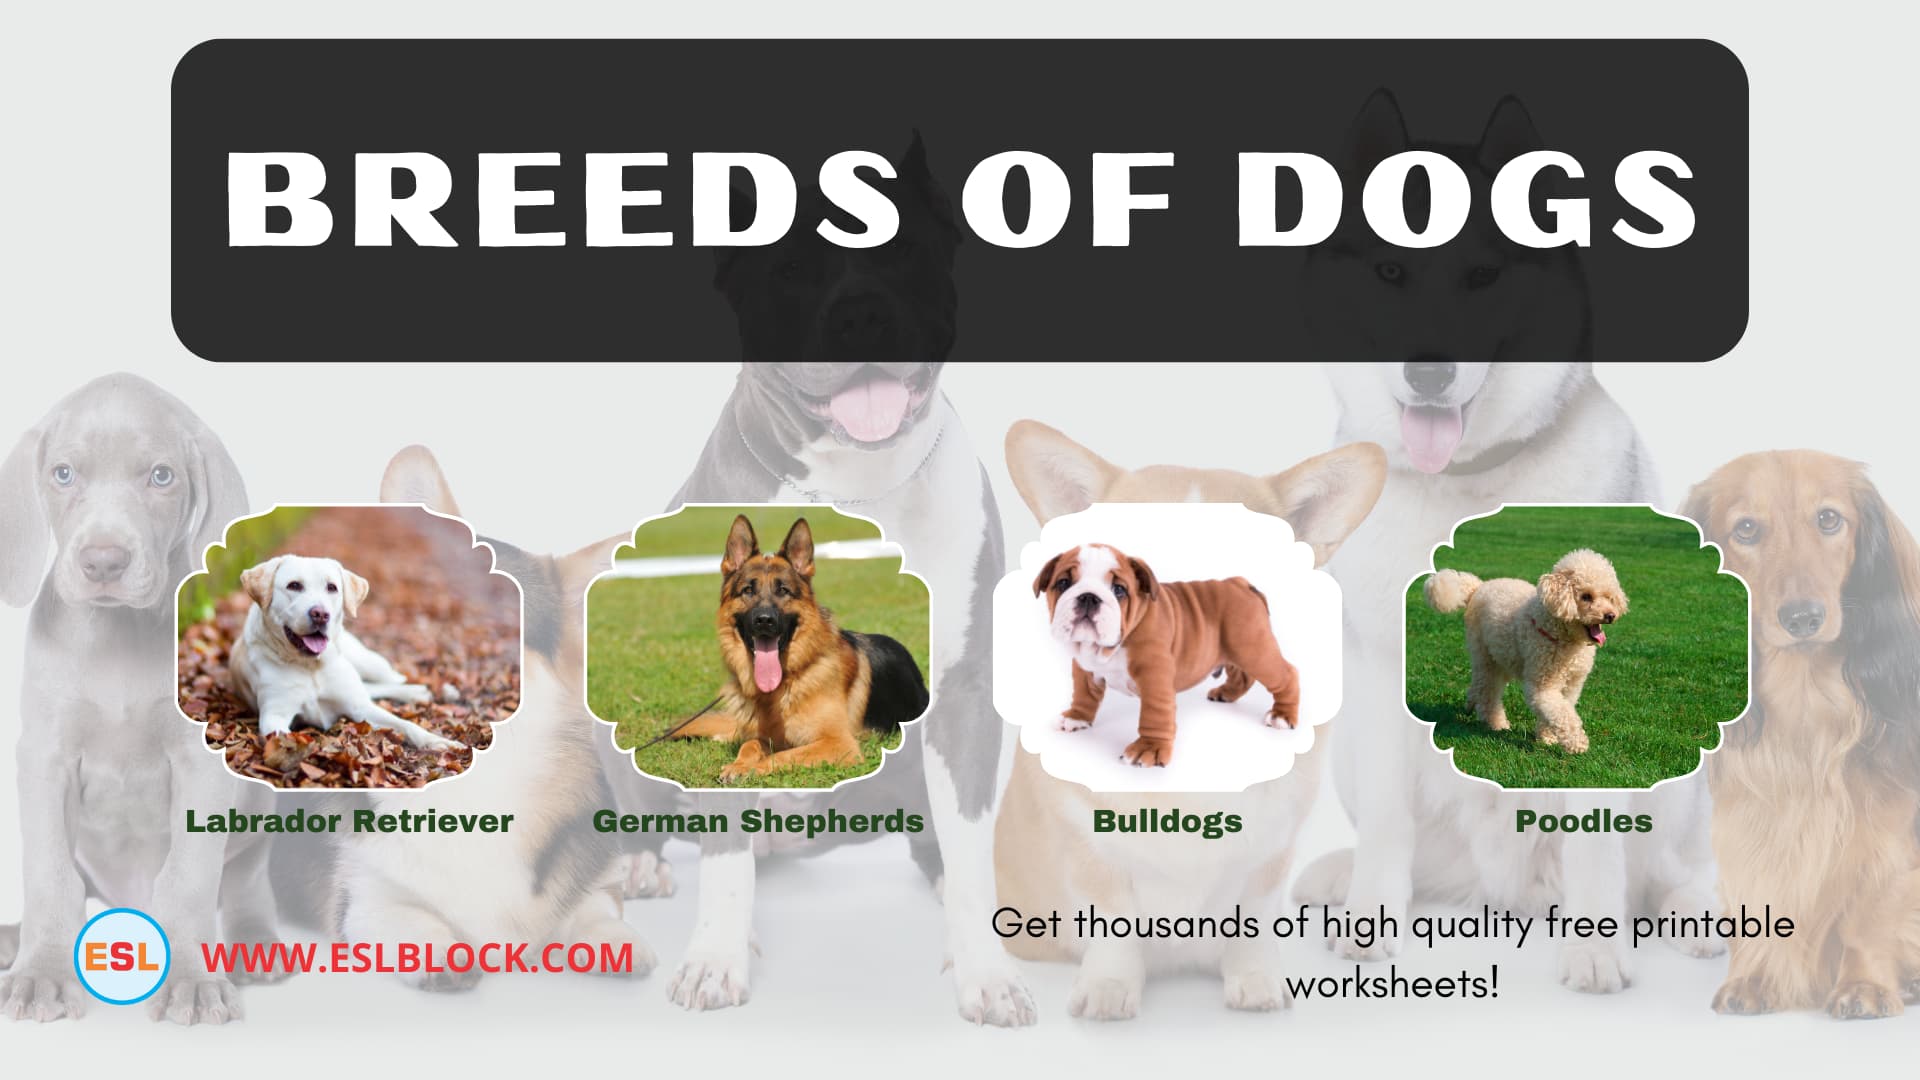 Animals Names, Best dog breeds, Big dog breeds, Cute dog breeds, Different Types of Dogs, Dog Breeds, Dogs List, English, English Nouns, English Vocabulary, English Words, Hunting dog breeds, List of Dog Breeds, Medium dog breeds, Nouns, Small dog breeds, Vocabulary